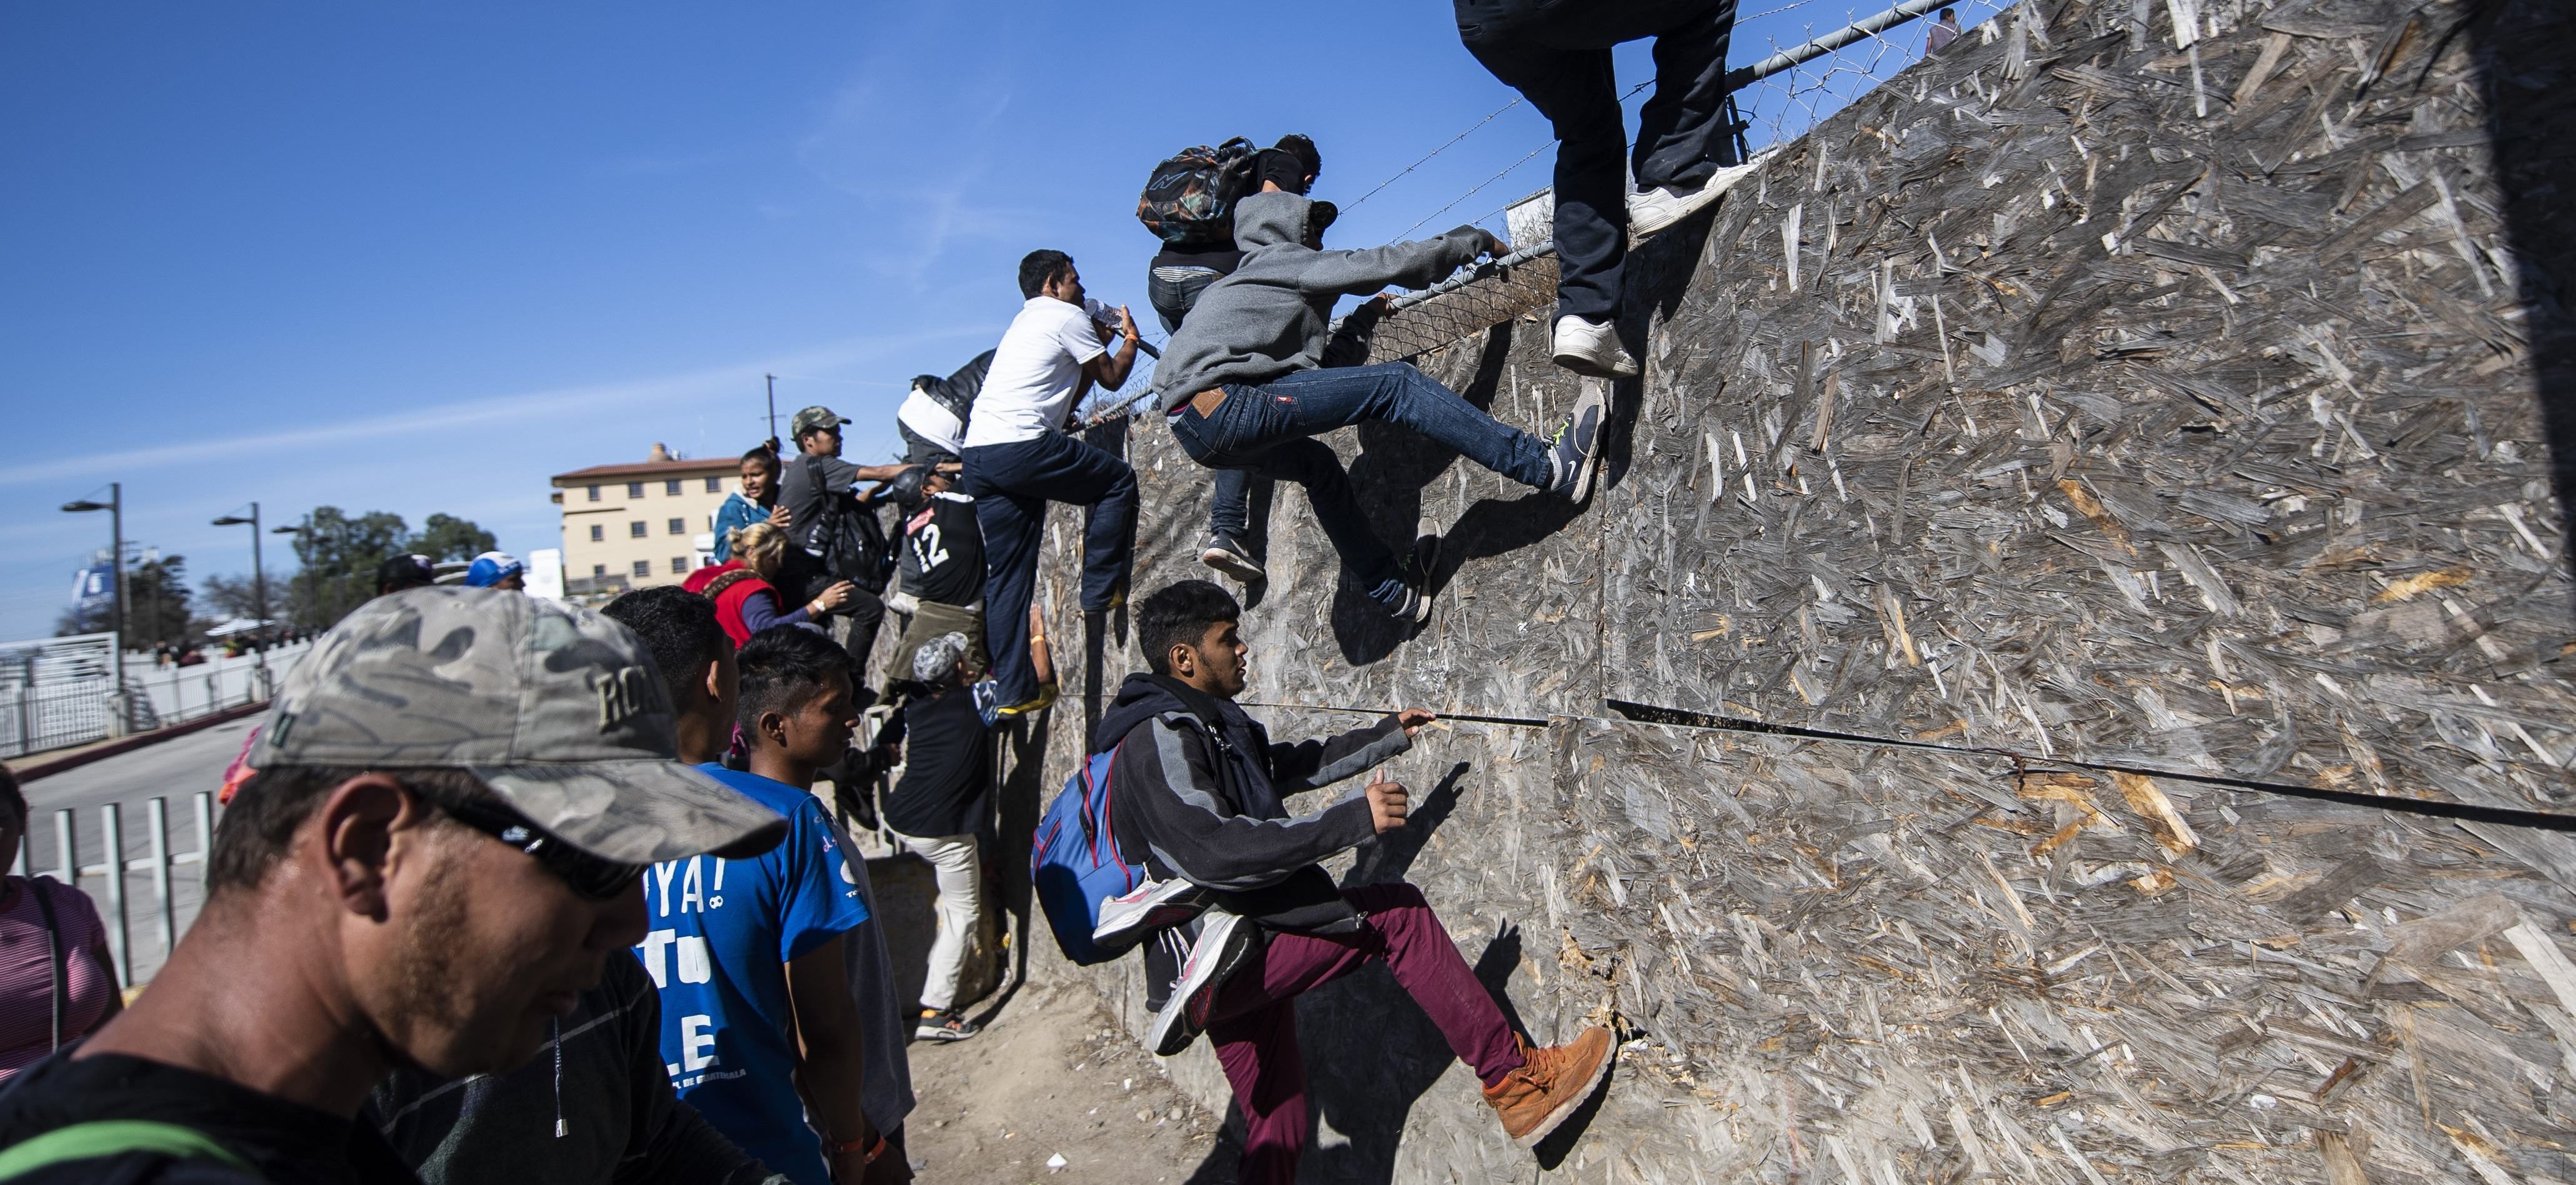 A group of Central American migrants -mostly from Honduras- get over a fence as they try to reach the US-Mexico border near the El Chaparral border crossing in Tijuana, Baja California State, Mexico, on November 25, 2018./ PEDRO PARDO/AFP/Getty Images